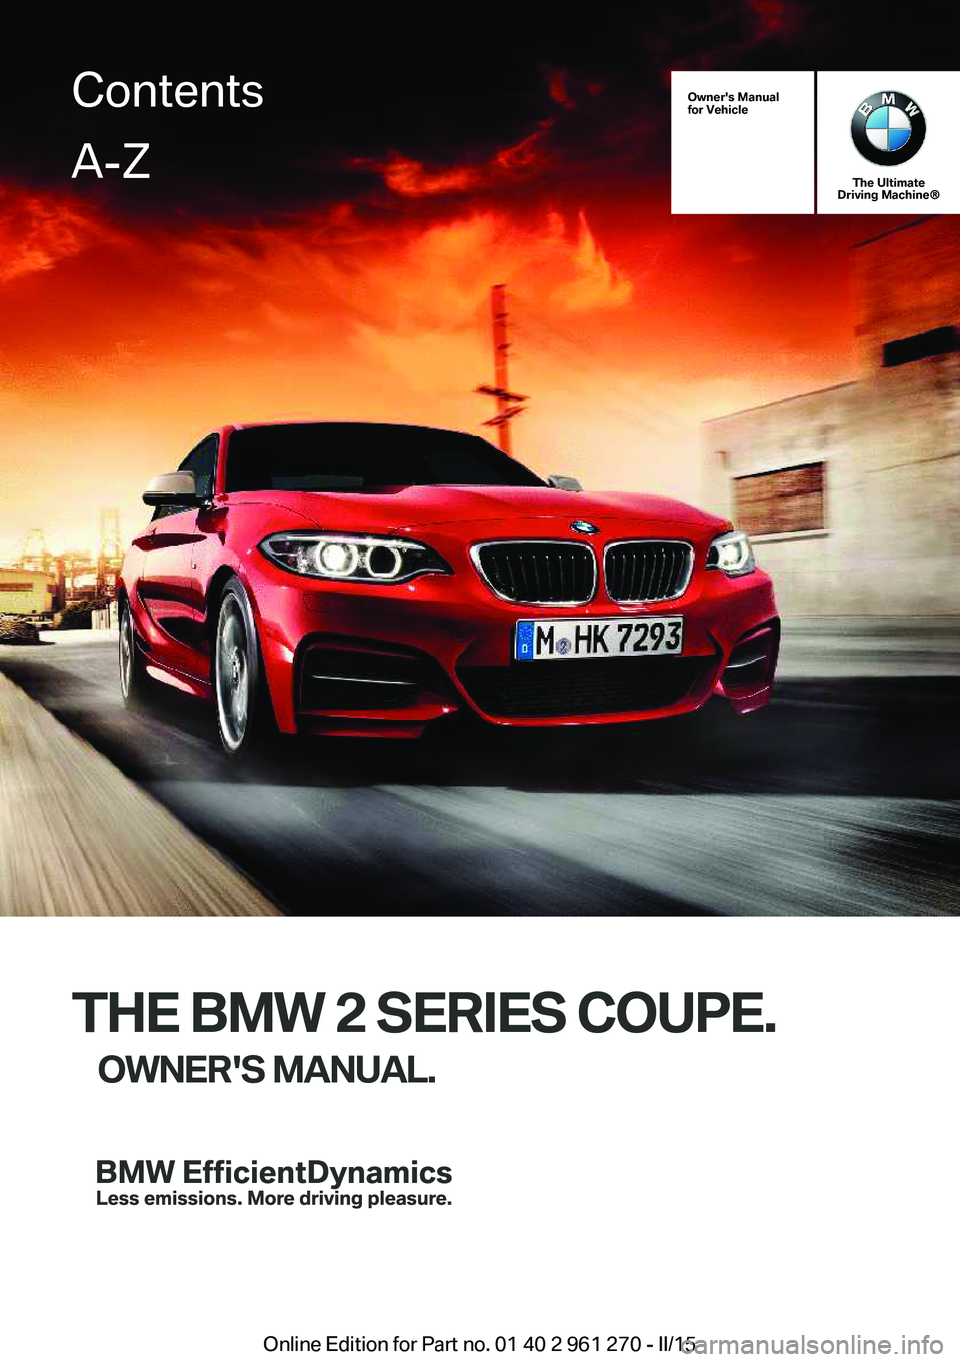 BMW M235I COUPE 2016  Owners Manual Owner's Manual
for Vehicle
The Ultimate
Driving Machine®
THE BMW 2 SERIES COUPE.
OWNER'S MANUAL.
ContentsA-Z
Online Edition for Part no. 01 40 2 961 270 - II/15   